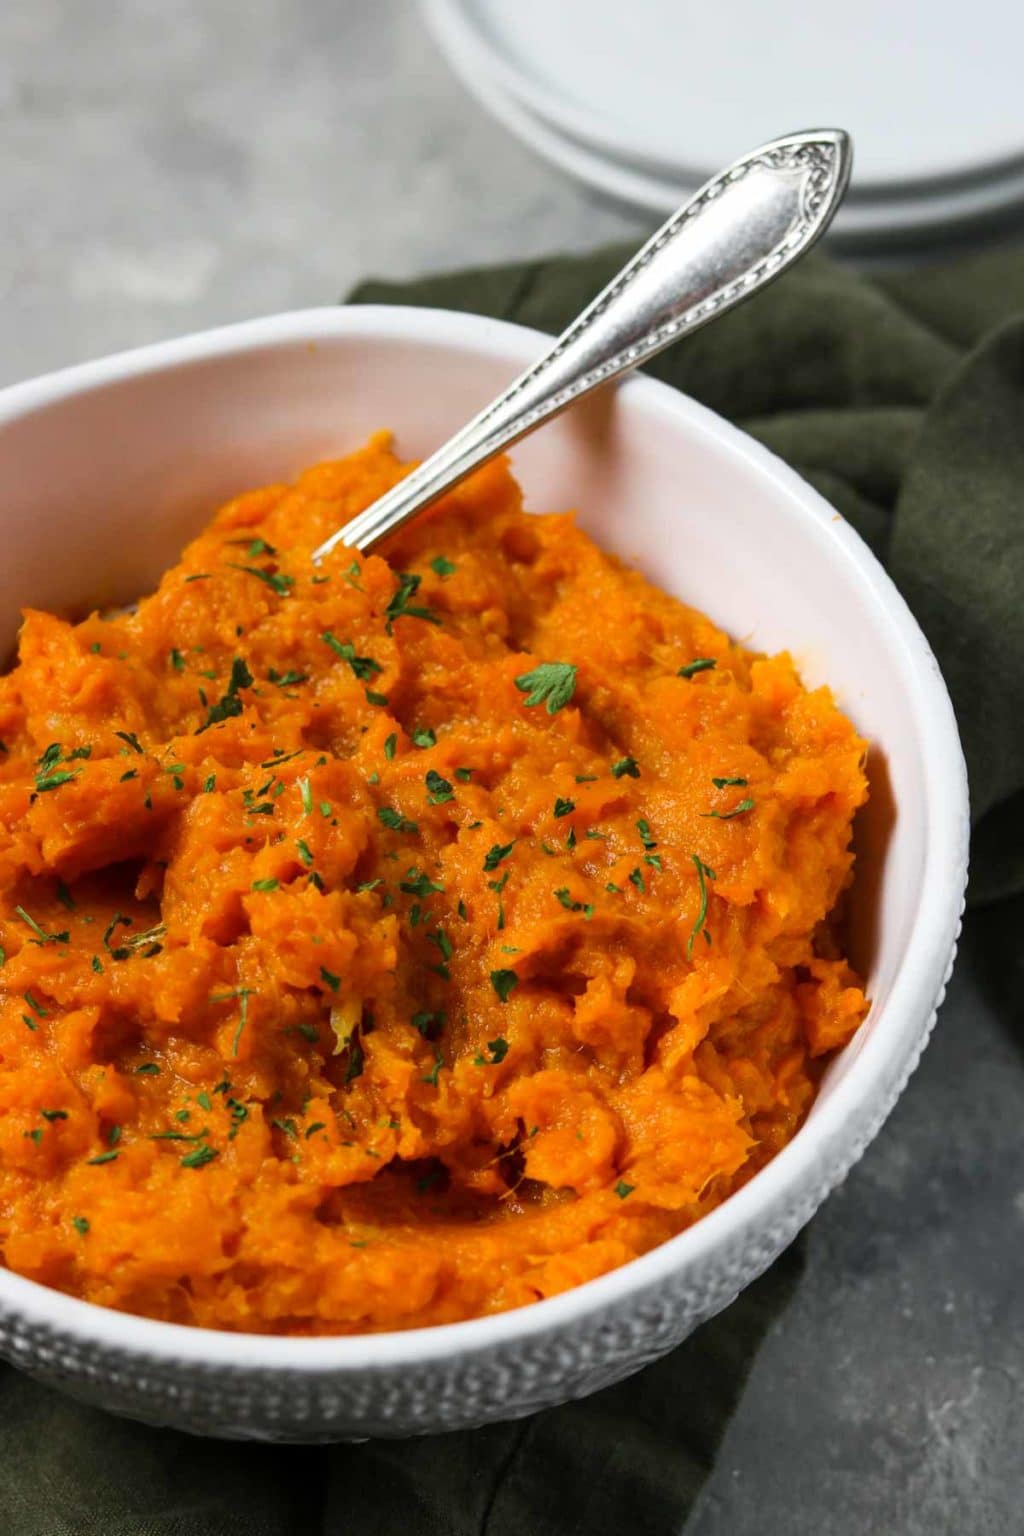 mashed sweet potatoes in a white bowl garnished with parsley